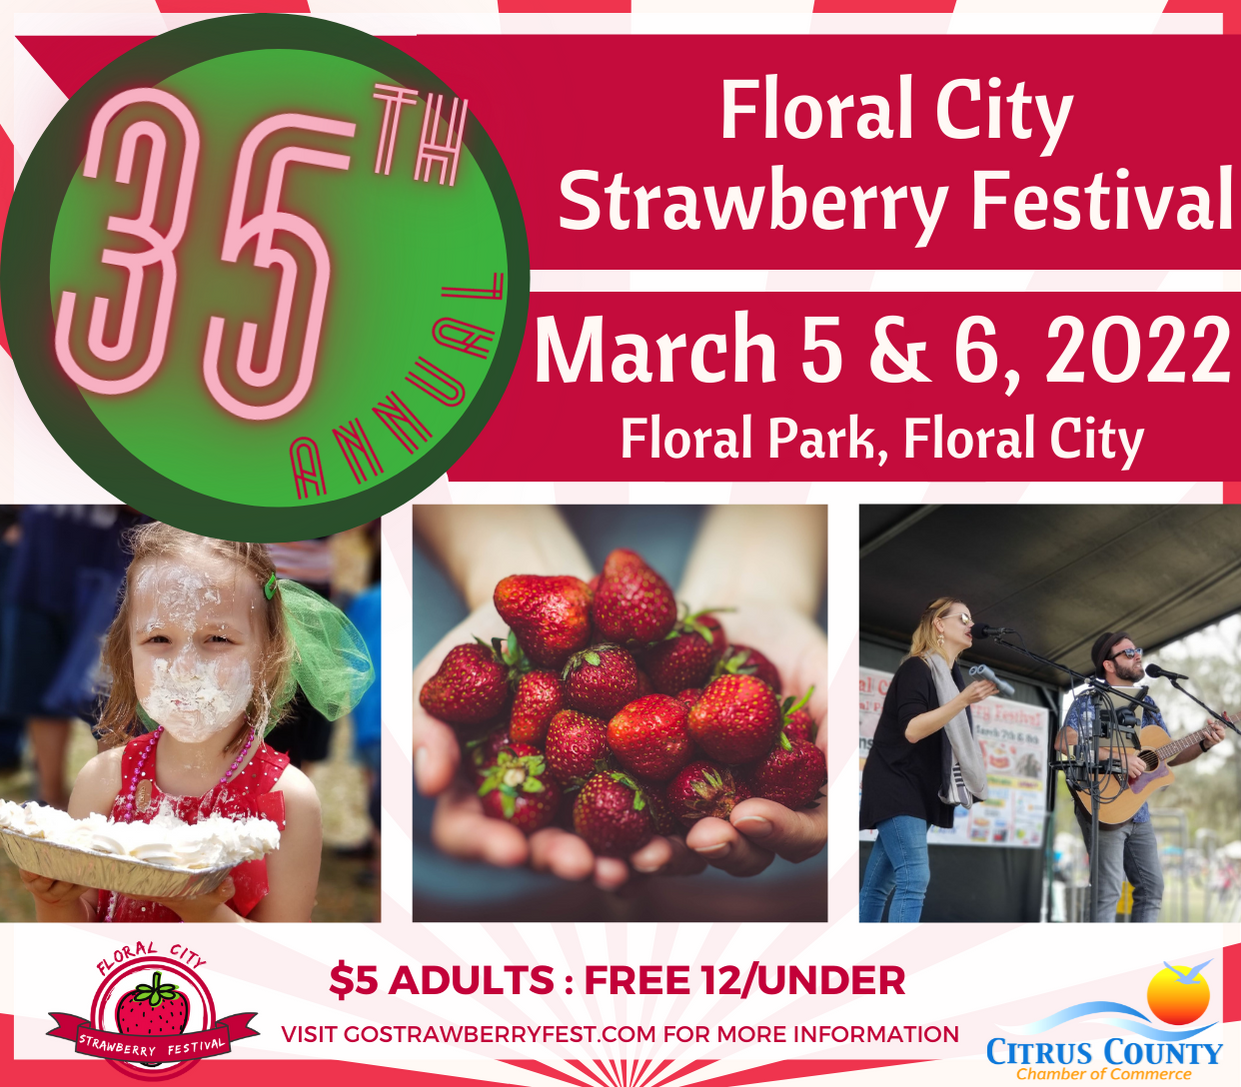 Citrus County Chamber’s 35th Annual Floral City Strawberry Festival